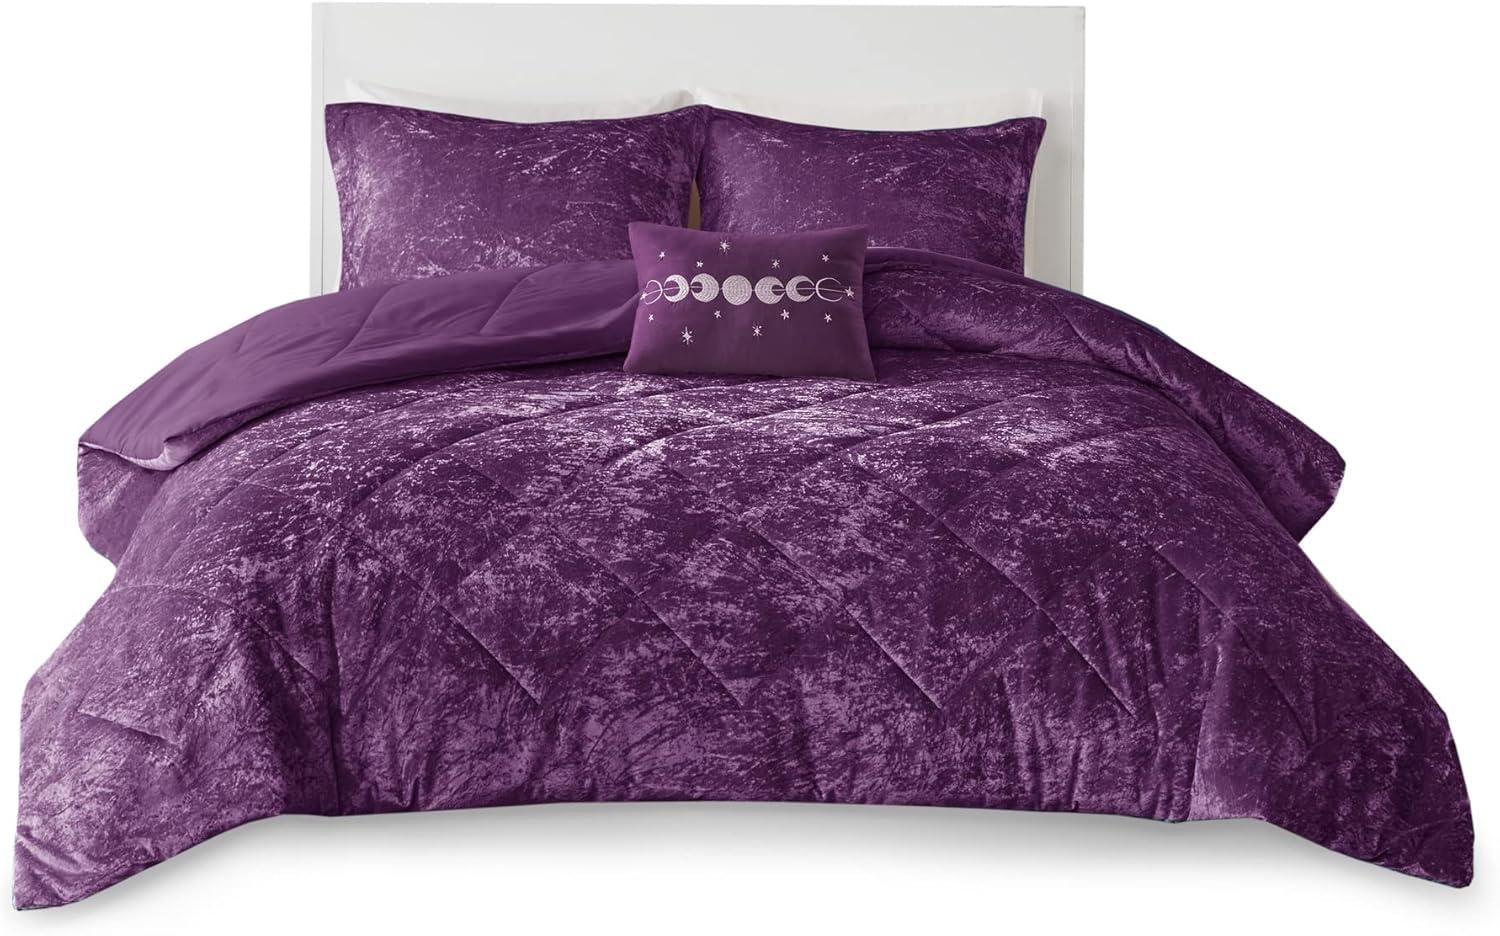 Luxurious Full/Queen Purple Velvet Quilted Comforter Set with Decorative Pillow